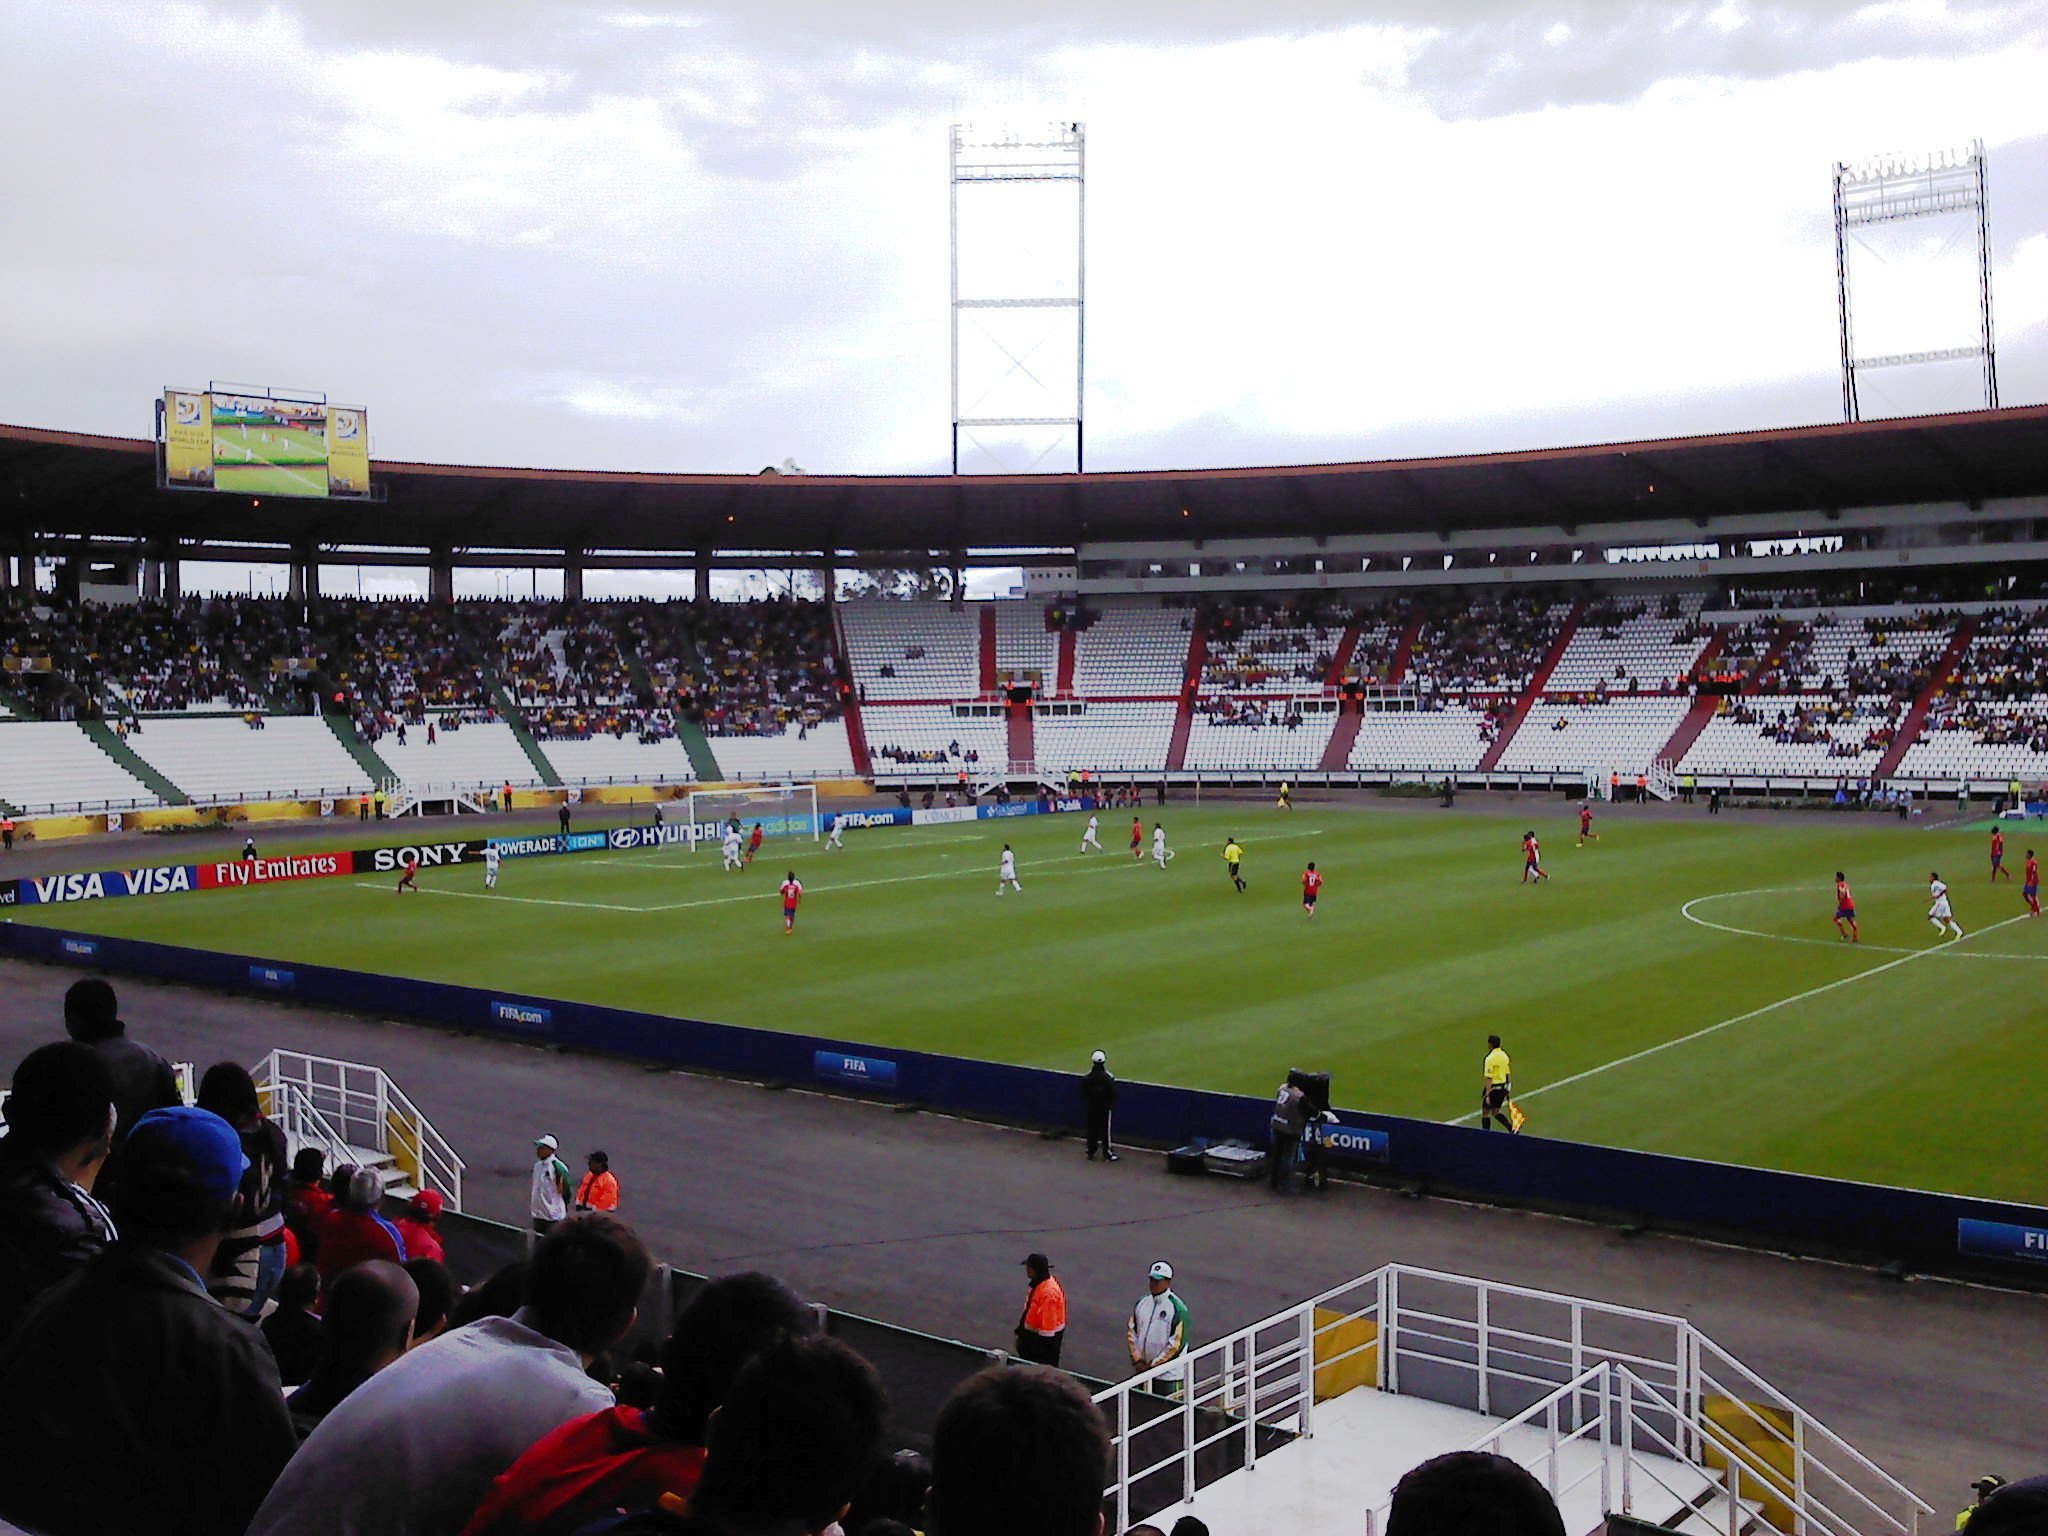 The stadiums of Colombia 